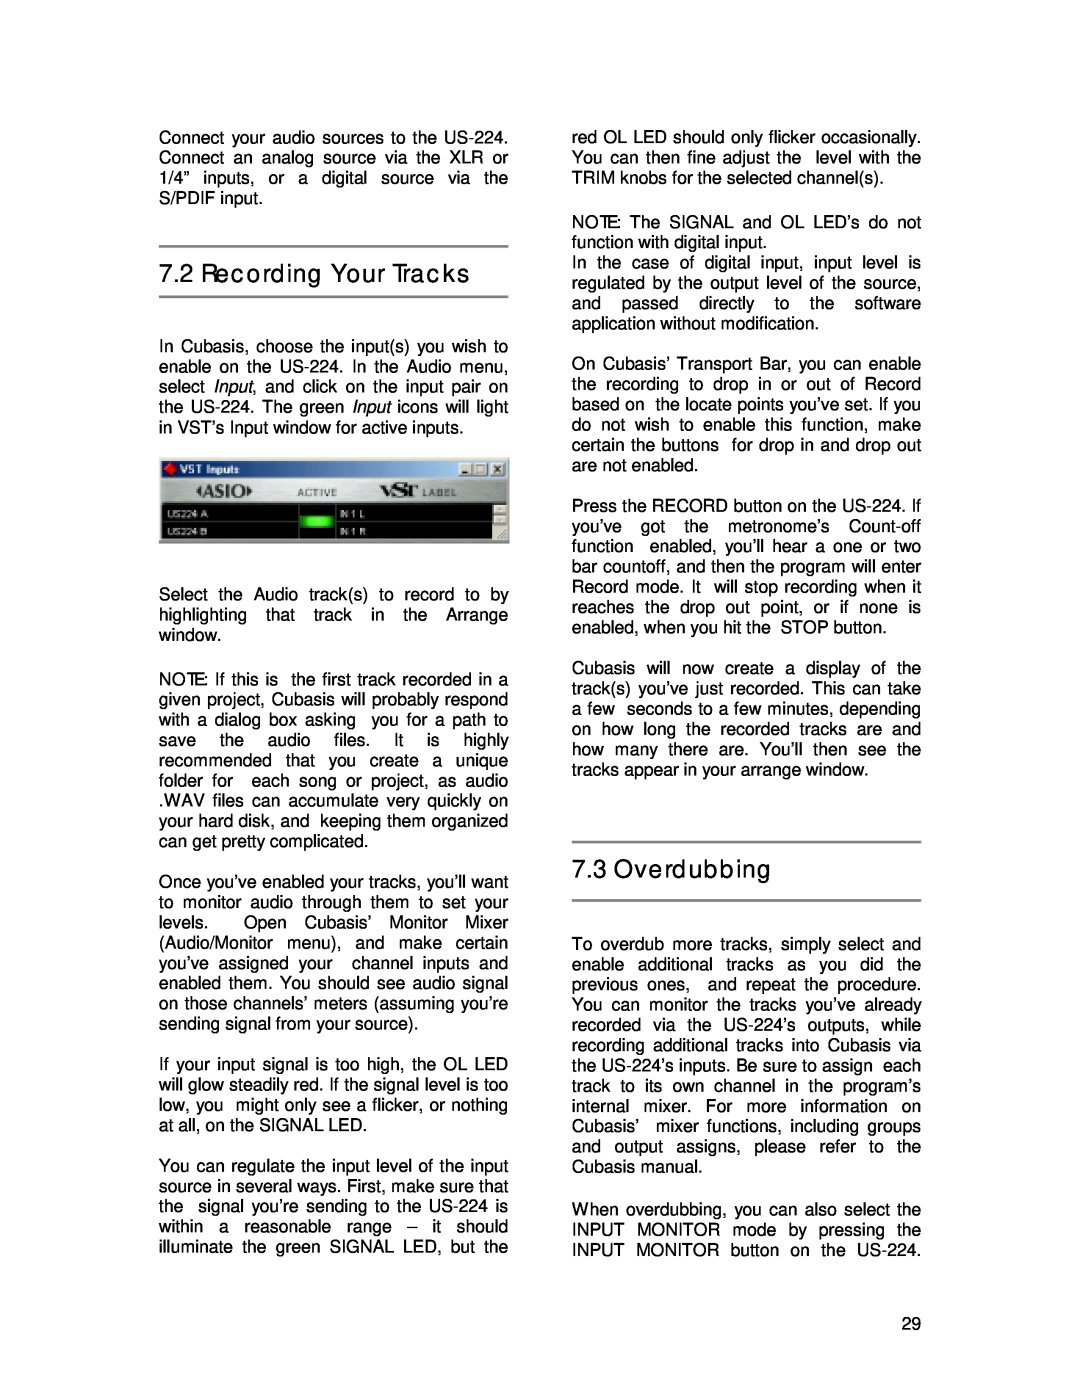 Tascam US-224 owner manual Recording Your Tracks, Overdubbing 